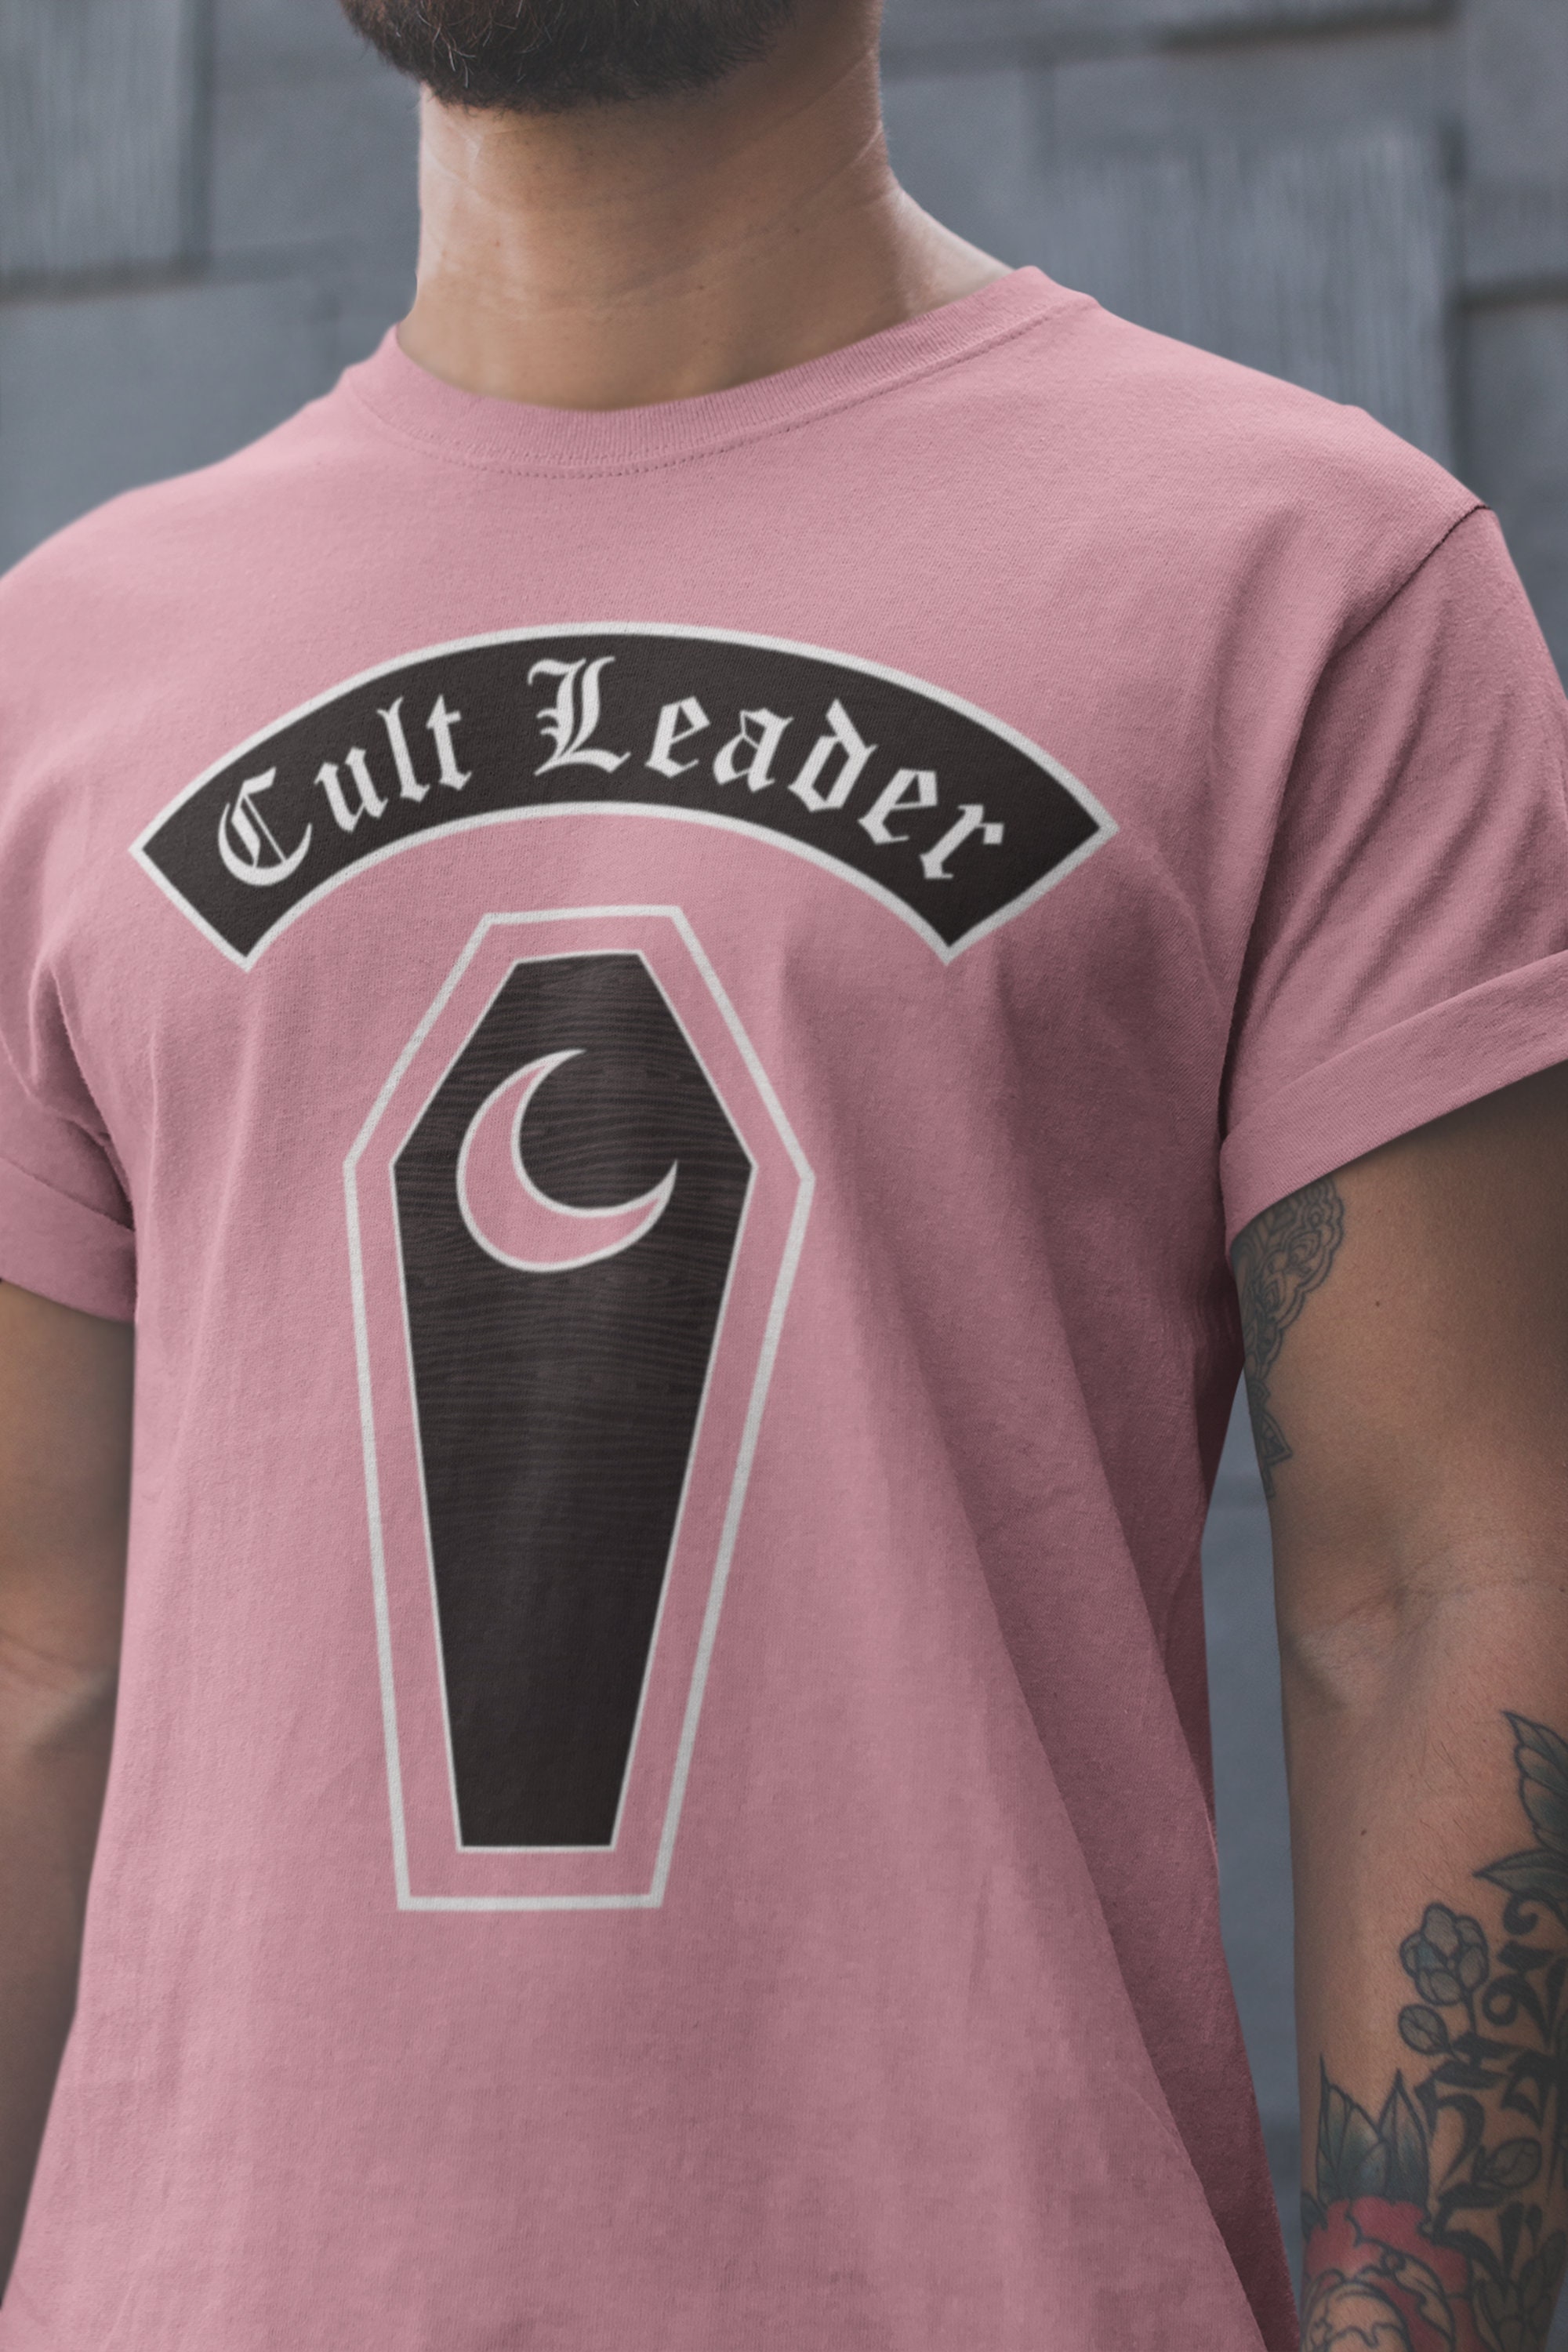 Pastel Goth Clothing, Cult Leader Tee, Coffin, Nu Goth, Unisex Men or Womens  T-shirt Perfect Pastel Soft Grunge, Gothic Gift -  Ireland